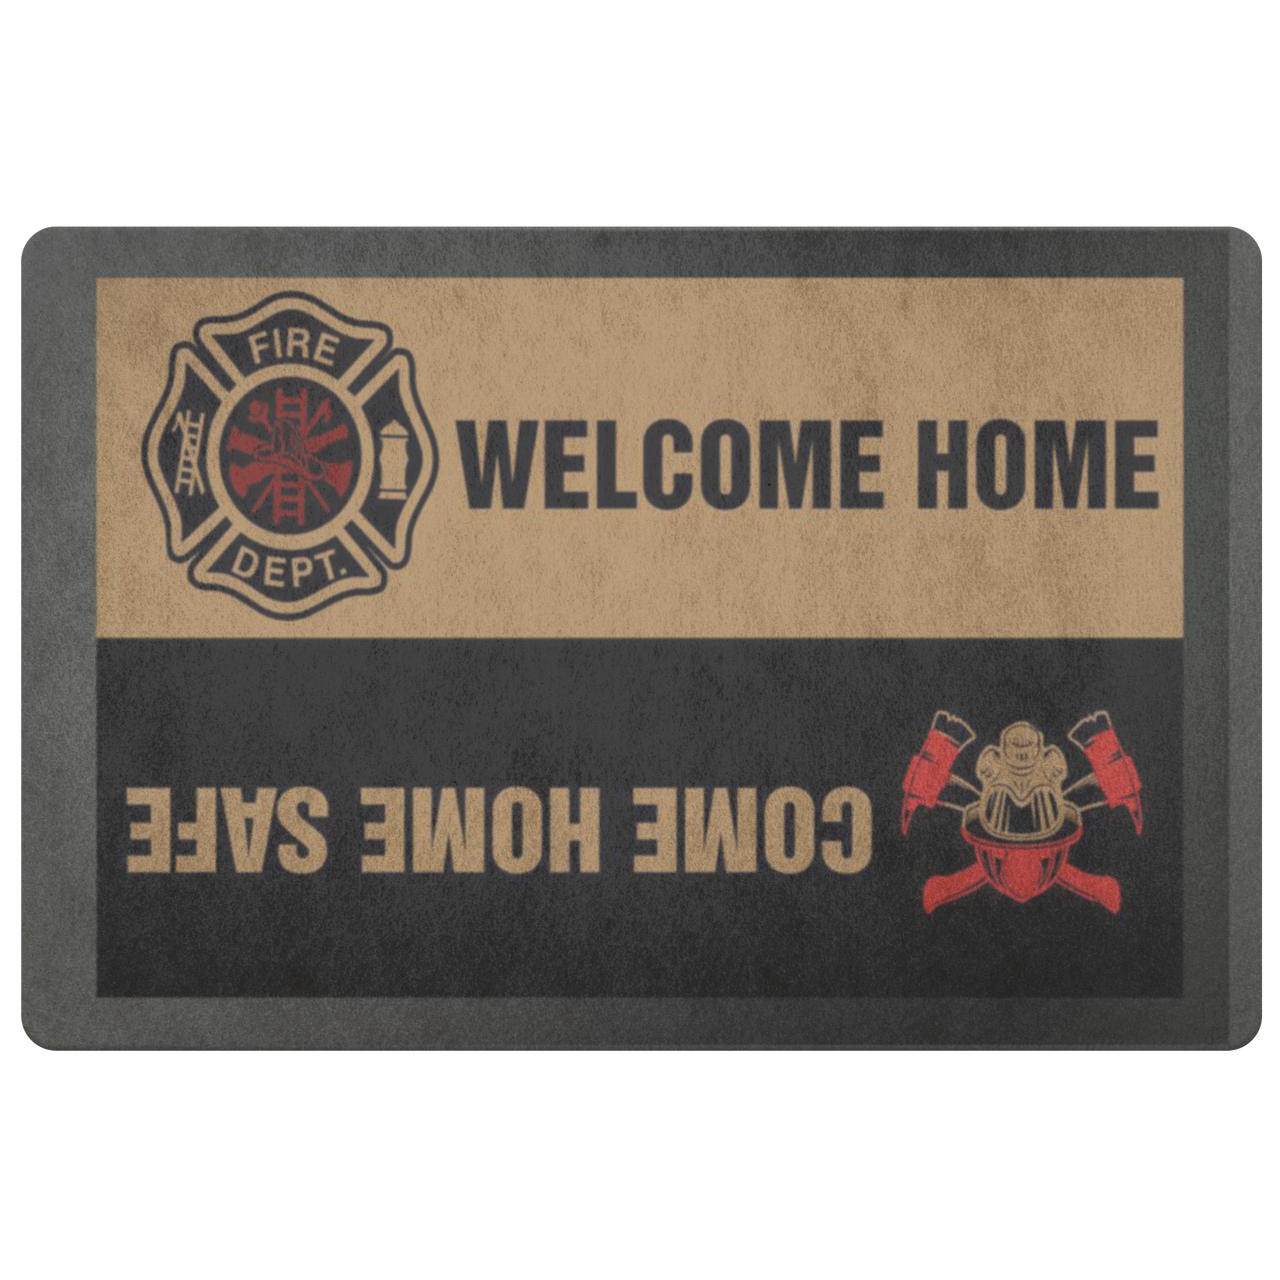 Firefighter Welcome Home Come Home Safe Indoor and Outdoor Doormat Warm House Gift Welcome Mat Gift  (Indoor & Outdoor Doormat 26x18)